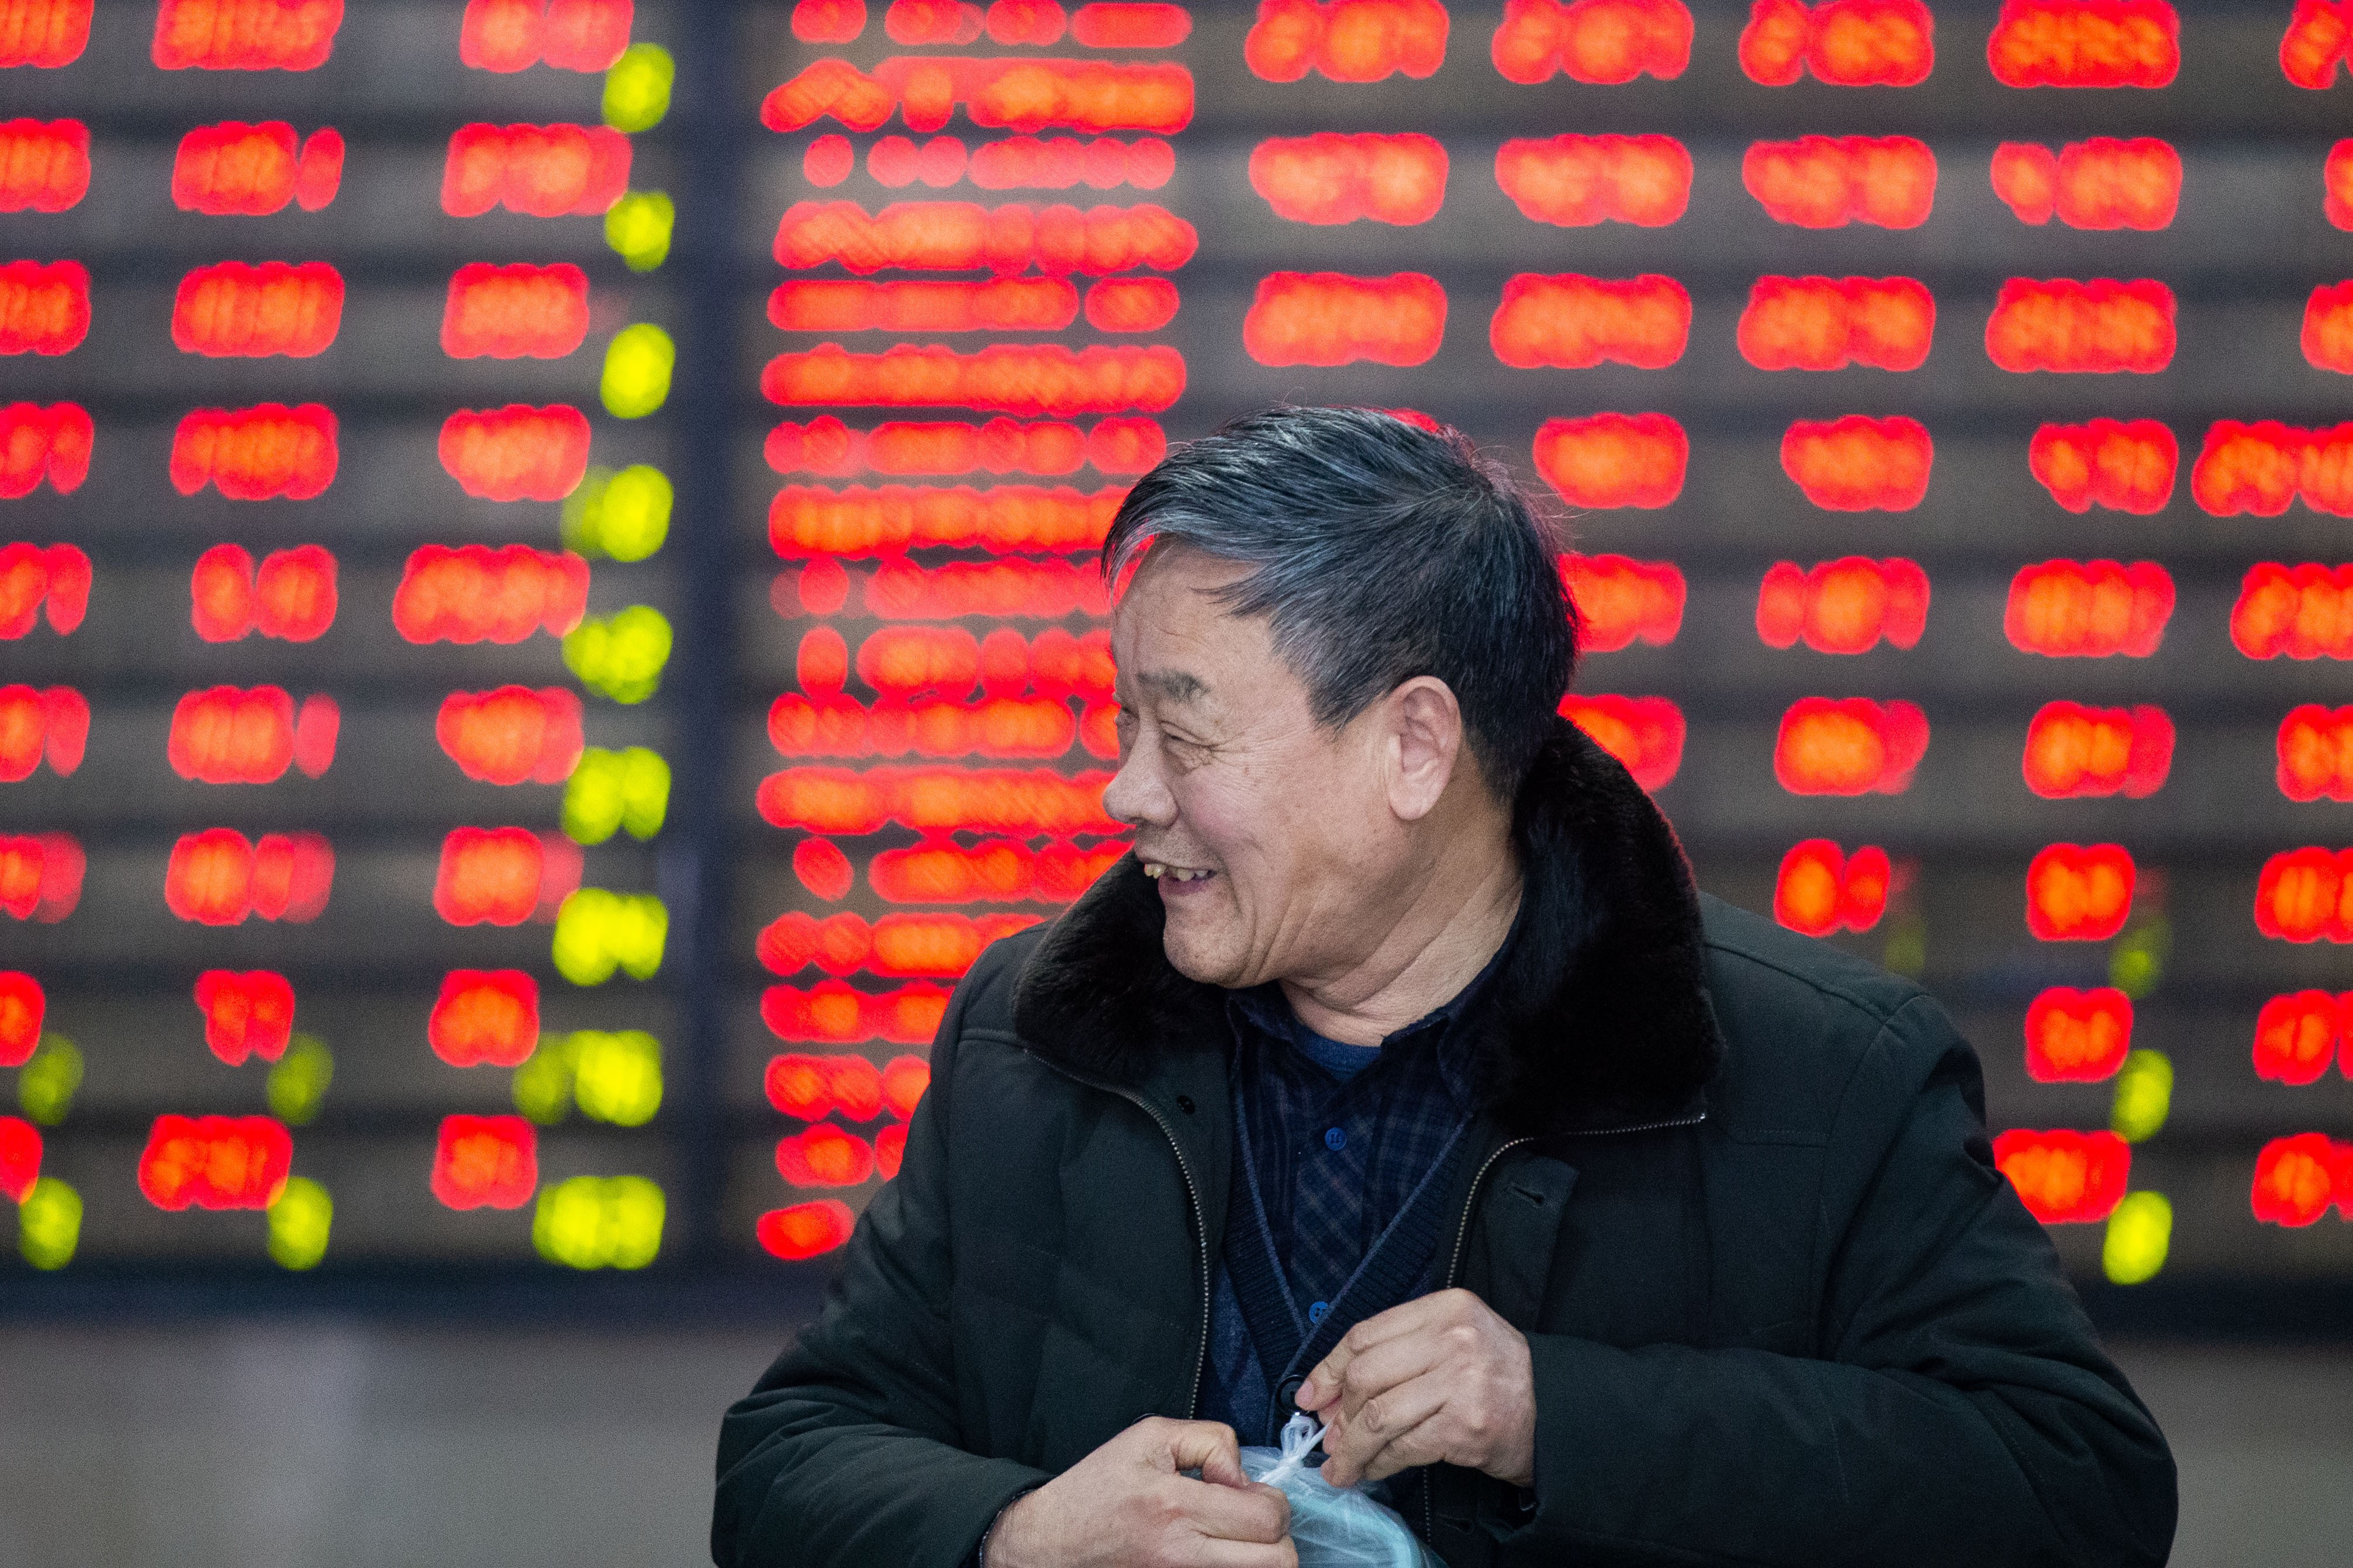 An investor at a stock exchange in Nanjing on March 4, as Chinese shares closed higher following the MSCI's decision to increase the weight of China A-shares in its indexes. Photo: Xinhua